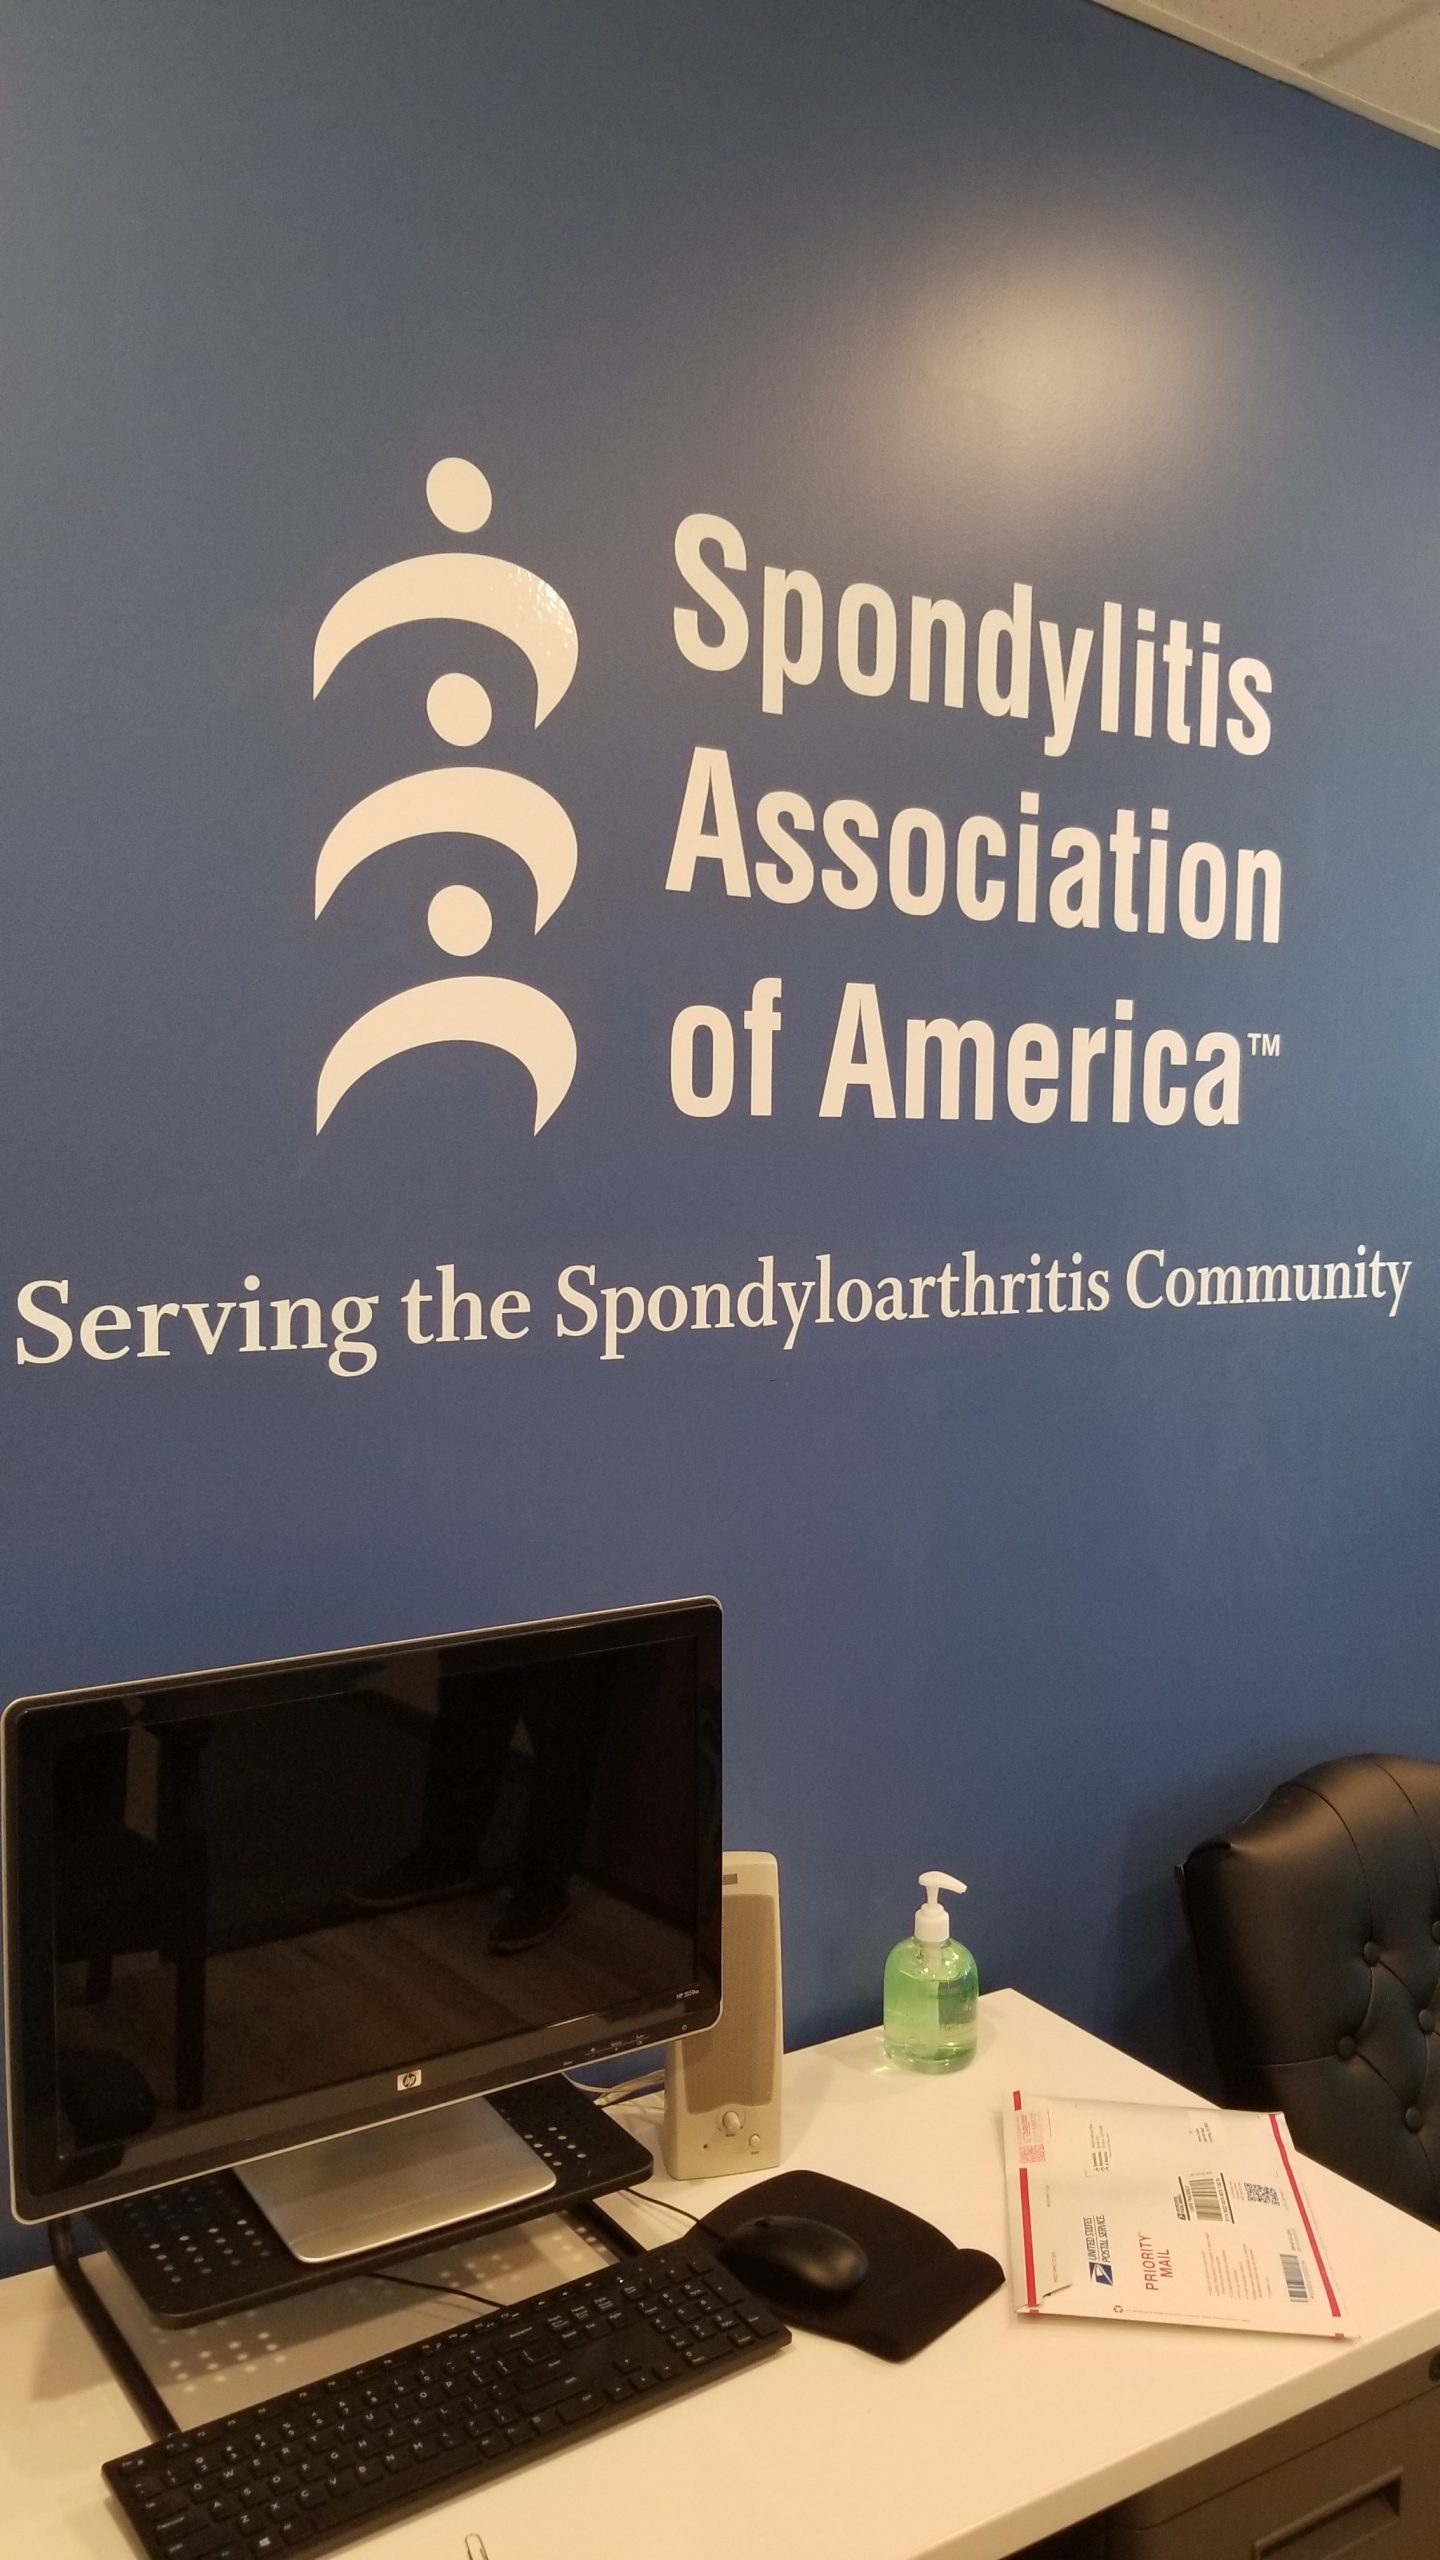 These are the wall graphics lobby sign for Spondylitis Association of America. With this, the Ventura nonprofit's office looks even more visually impressive.